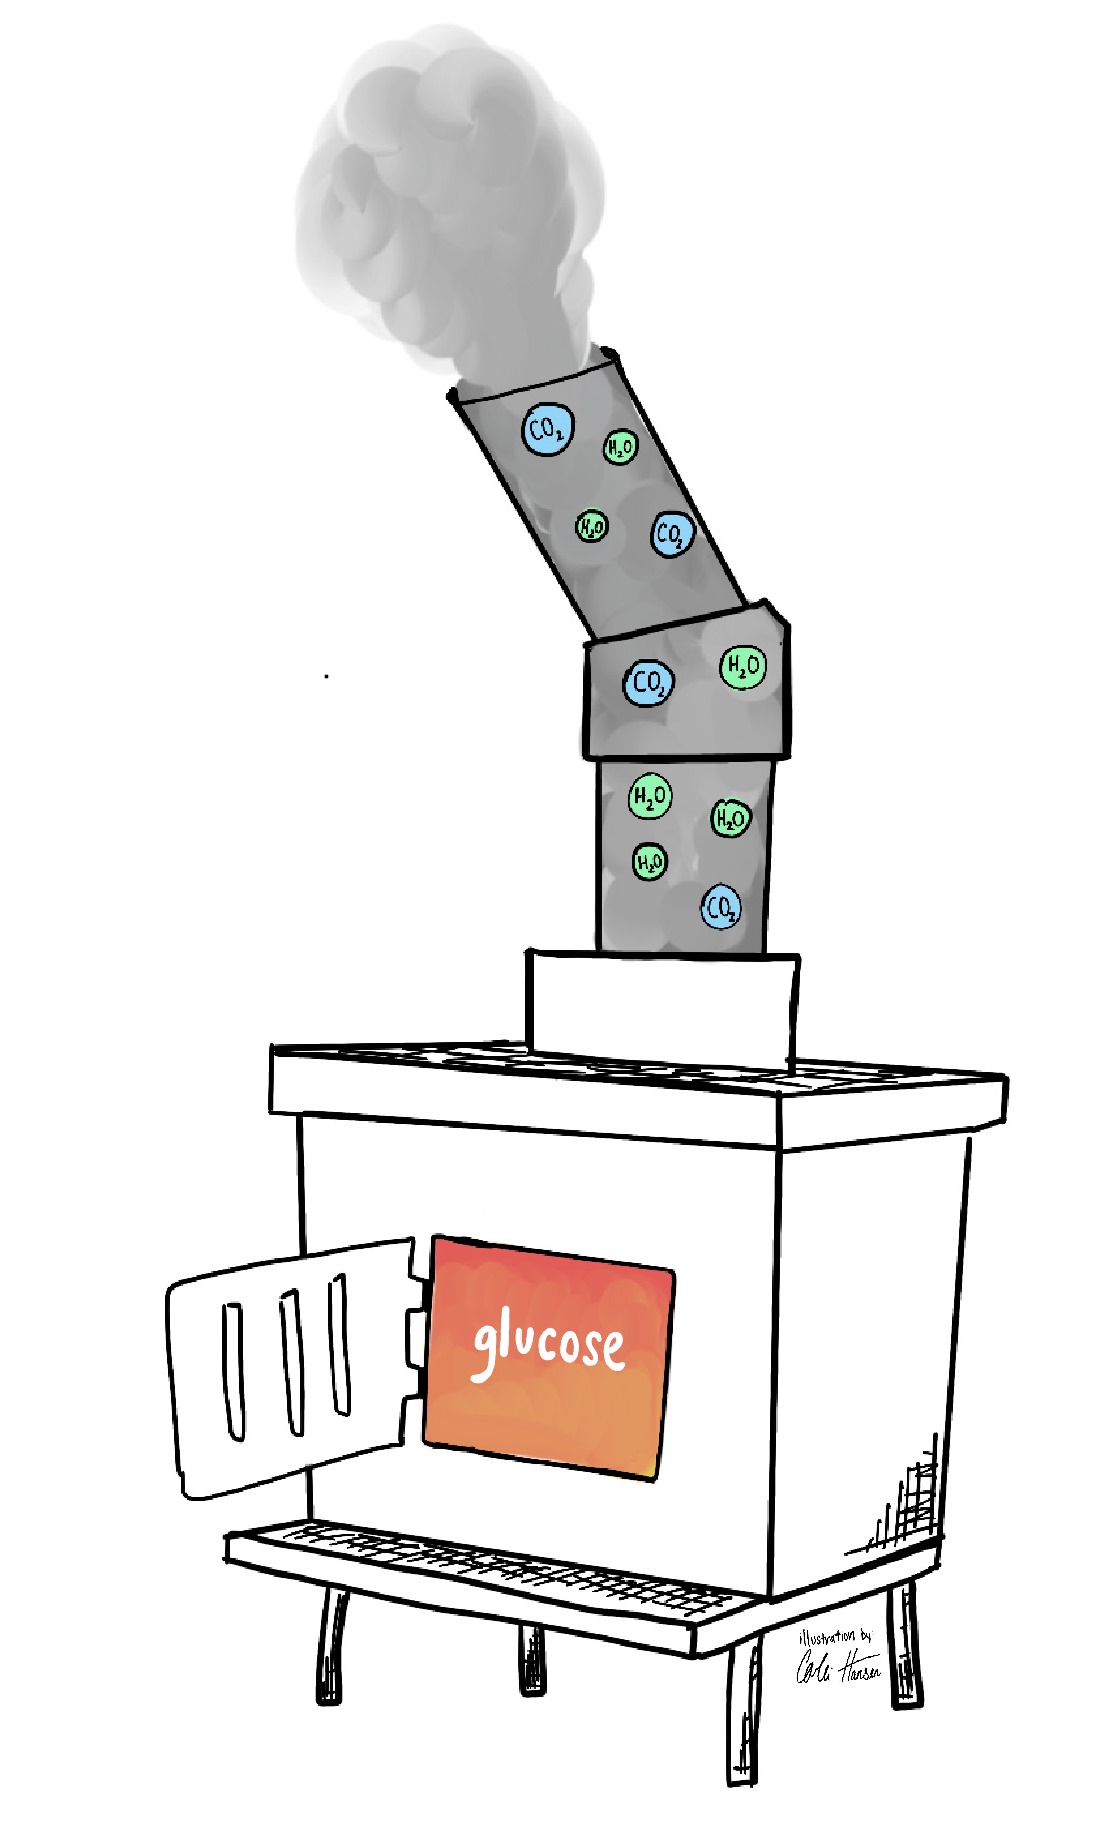 Illustration of a stove, with glucose inside and carbon dioxide, water, and smoke coming out of an exhaust pipe